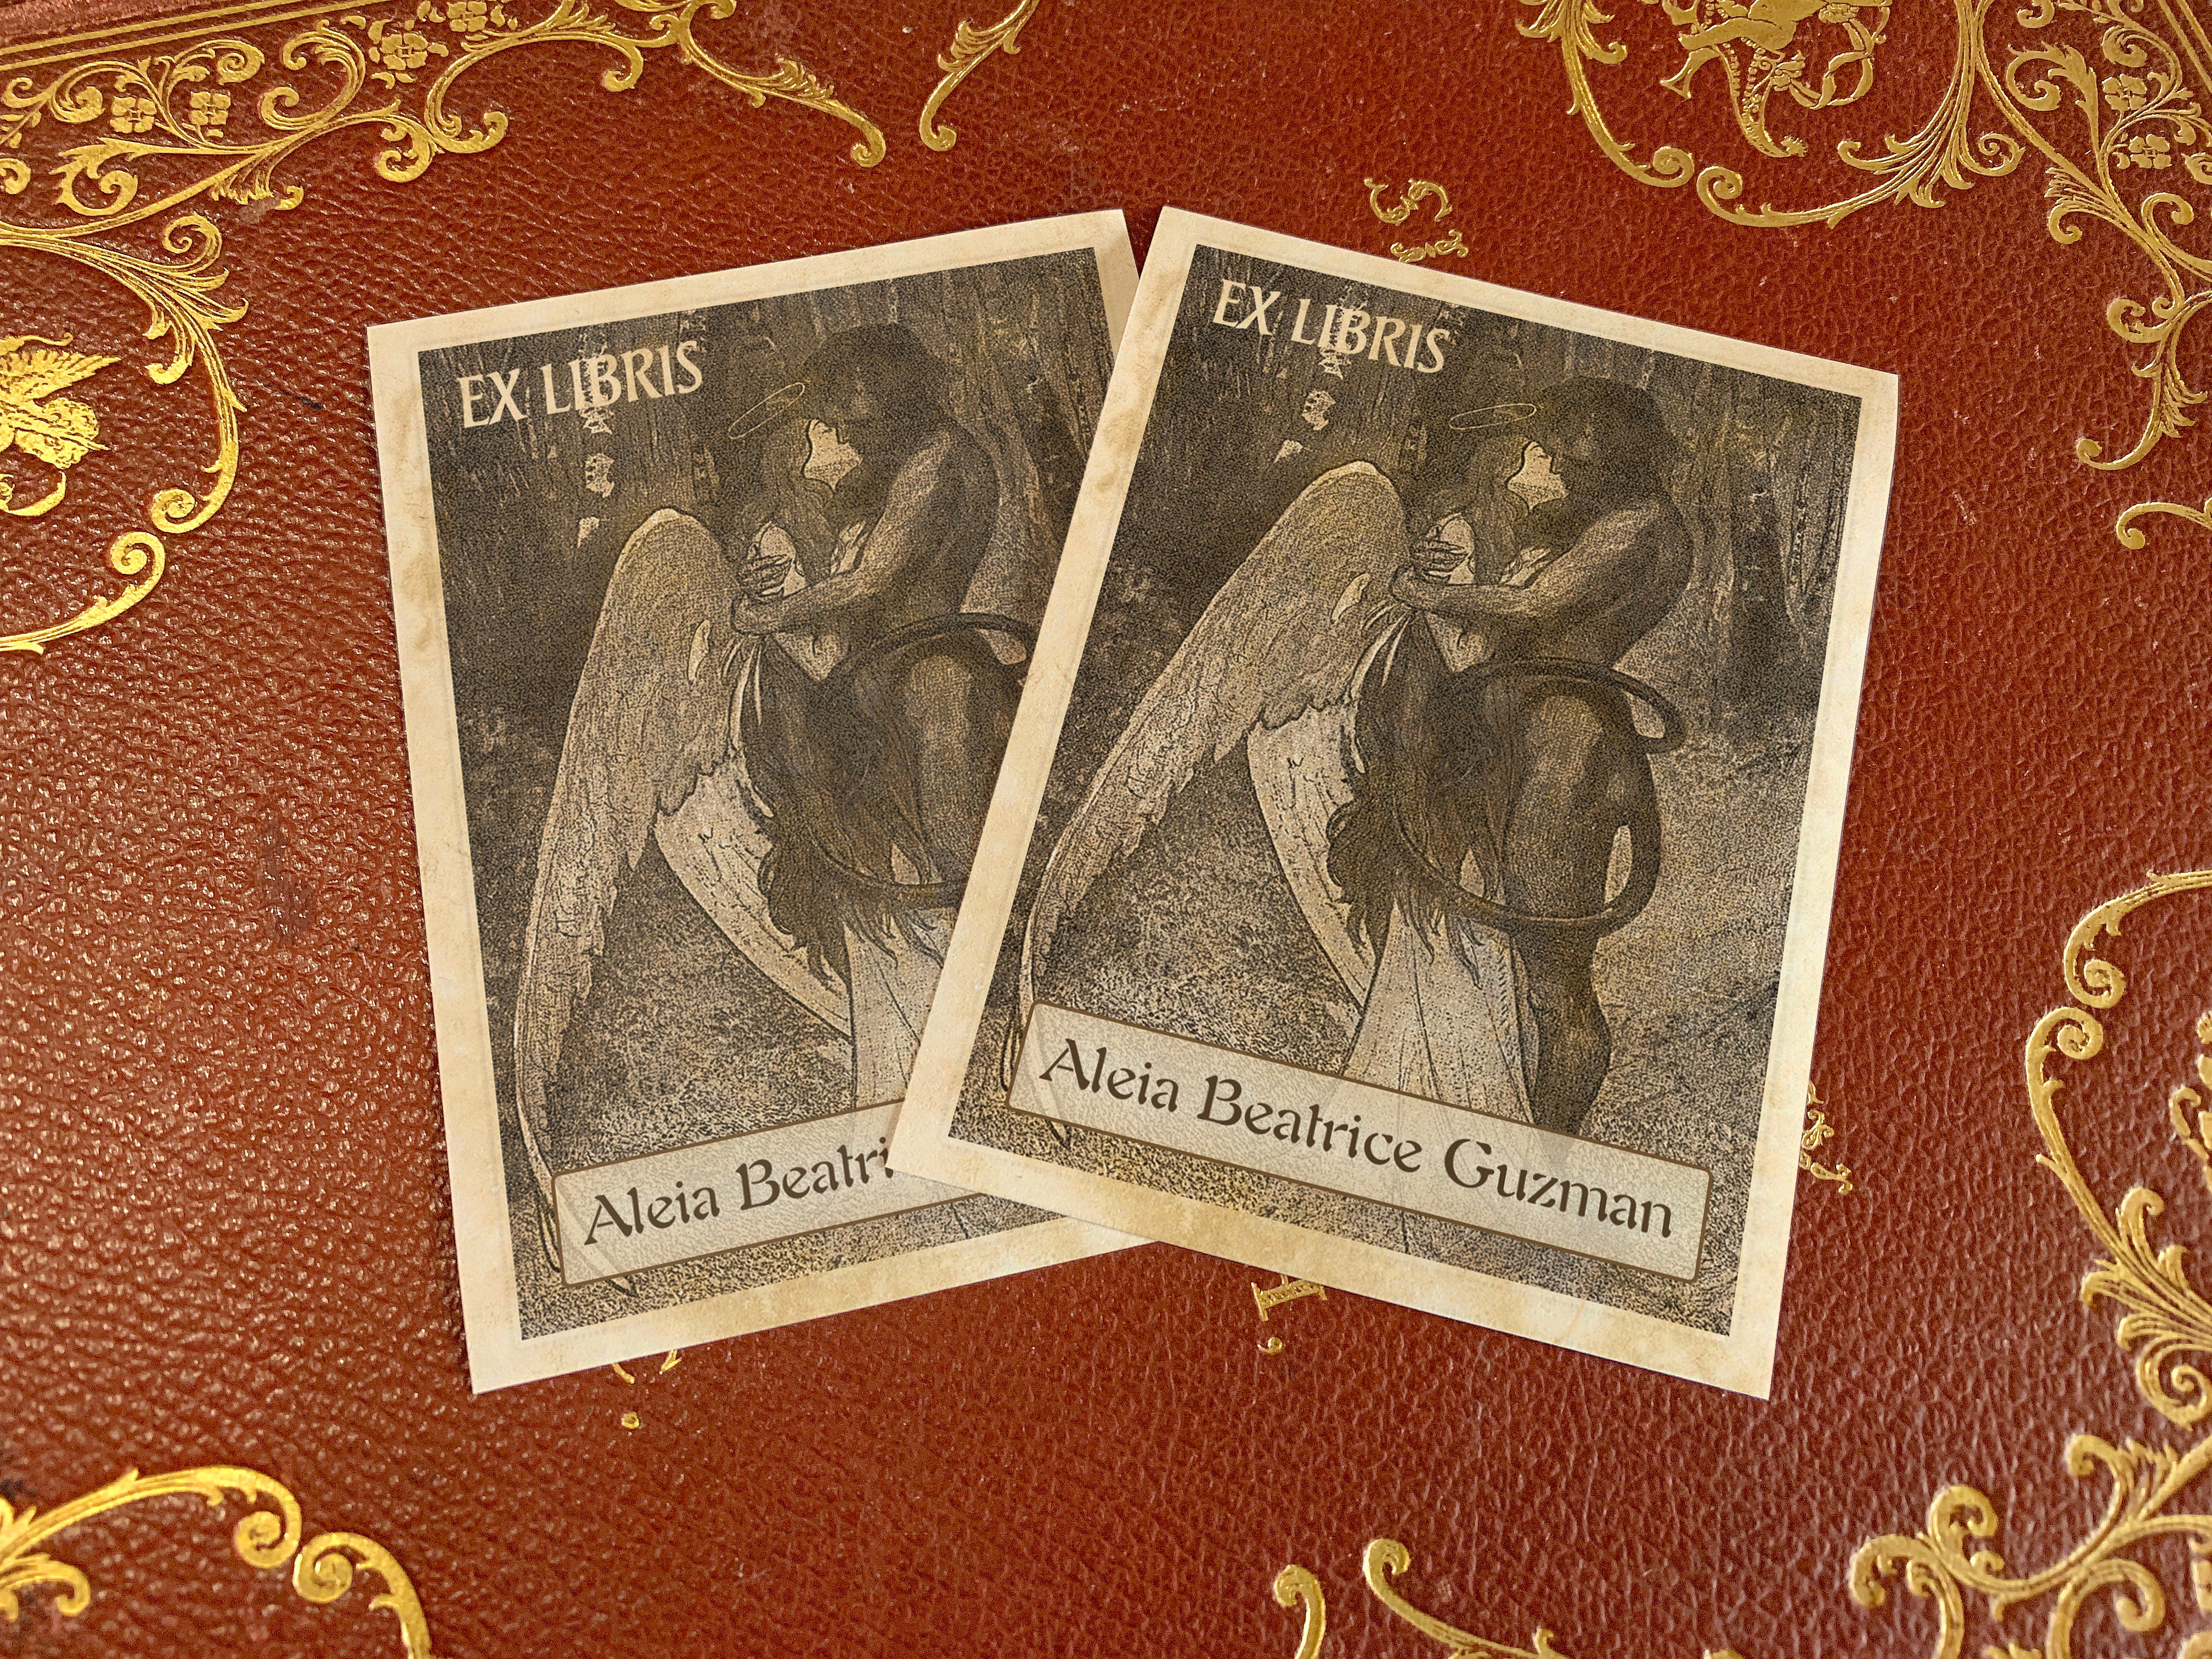 Angel and Demon Kissing, Personalized Ex-Libris Bookplates, Crafted on Traditional Gummed Paper, 3in x 4in, Set of 30